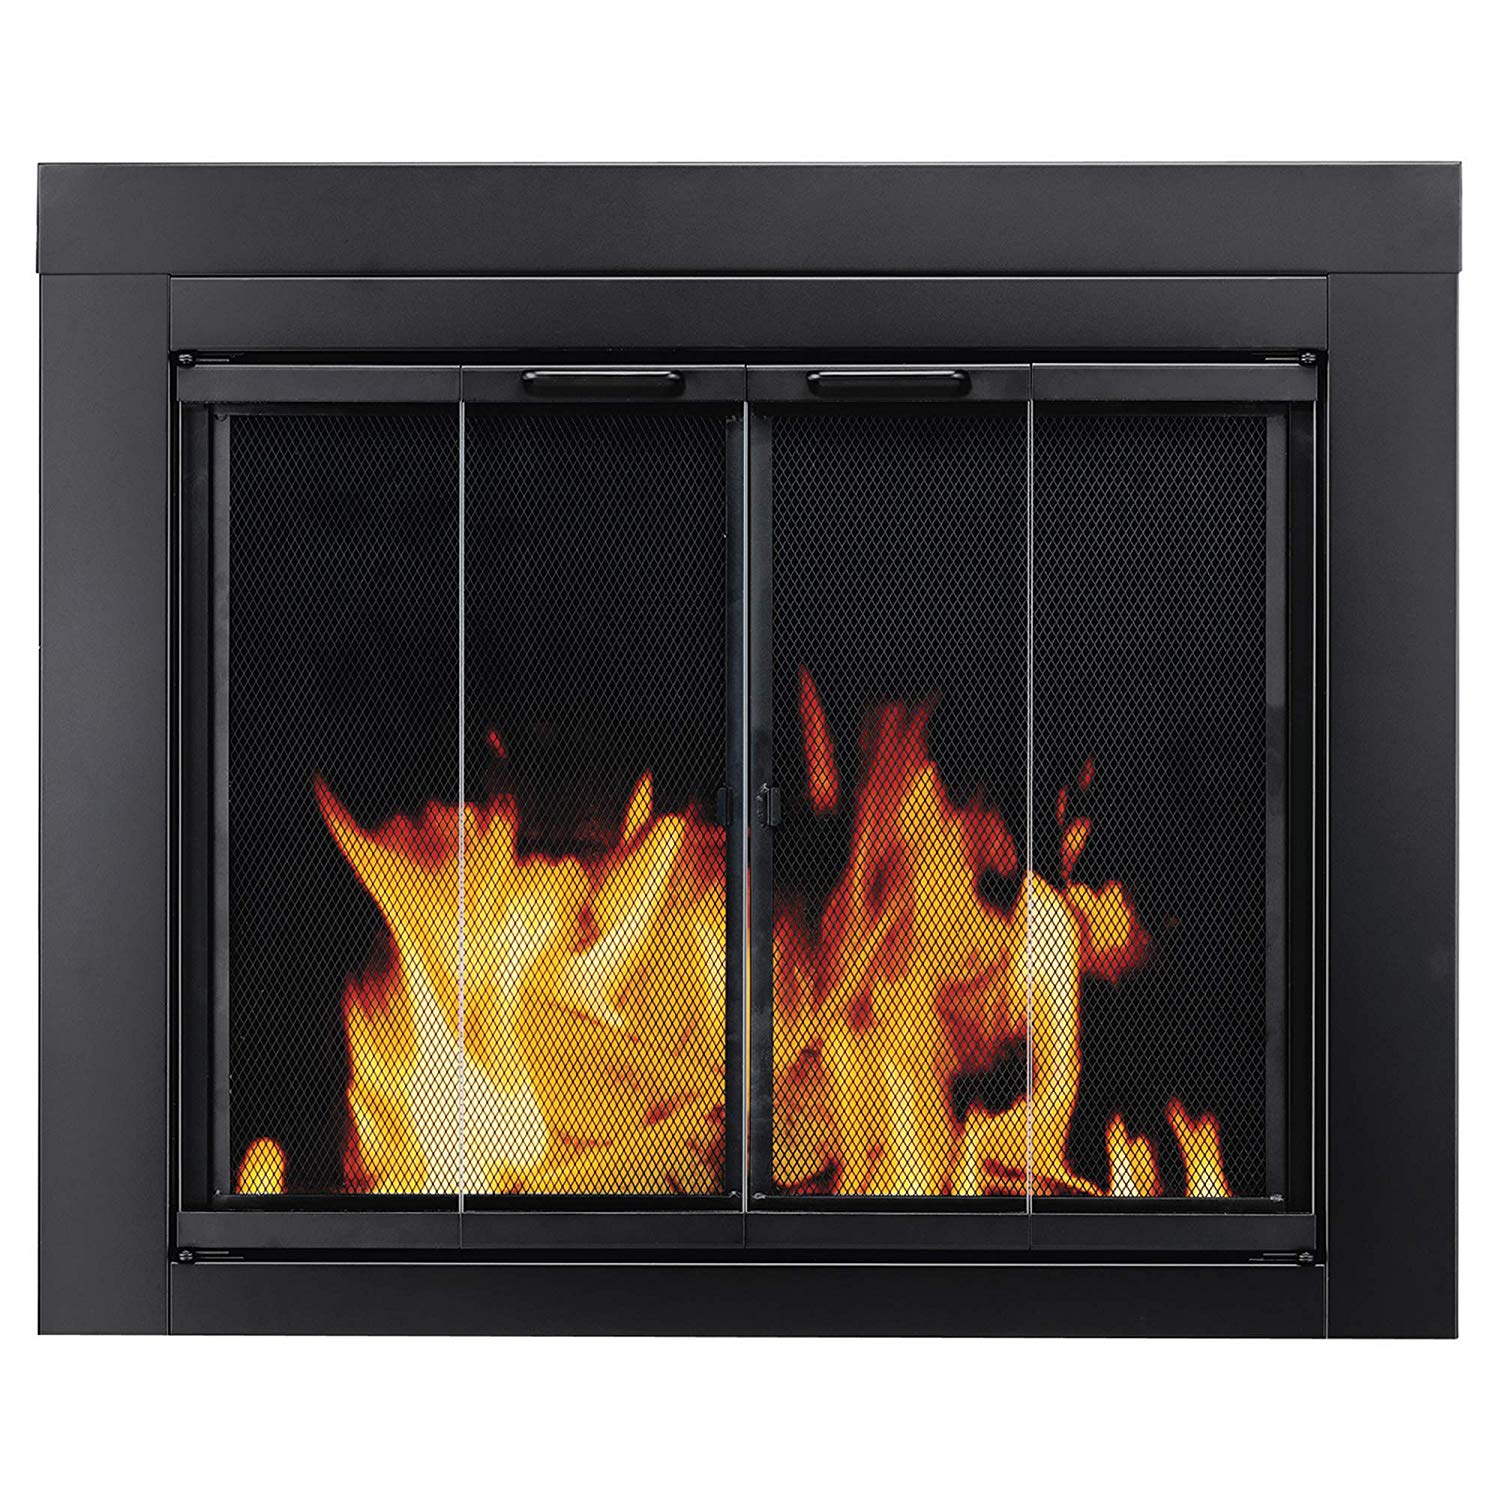 Gas Fireplace Insulation Fresh Pleasant Hearth at 1000 ascot Fireplace Glass Door Black Small